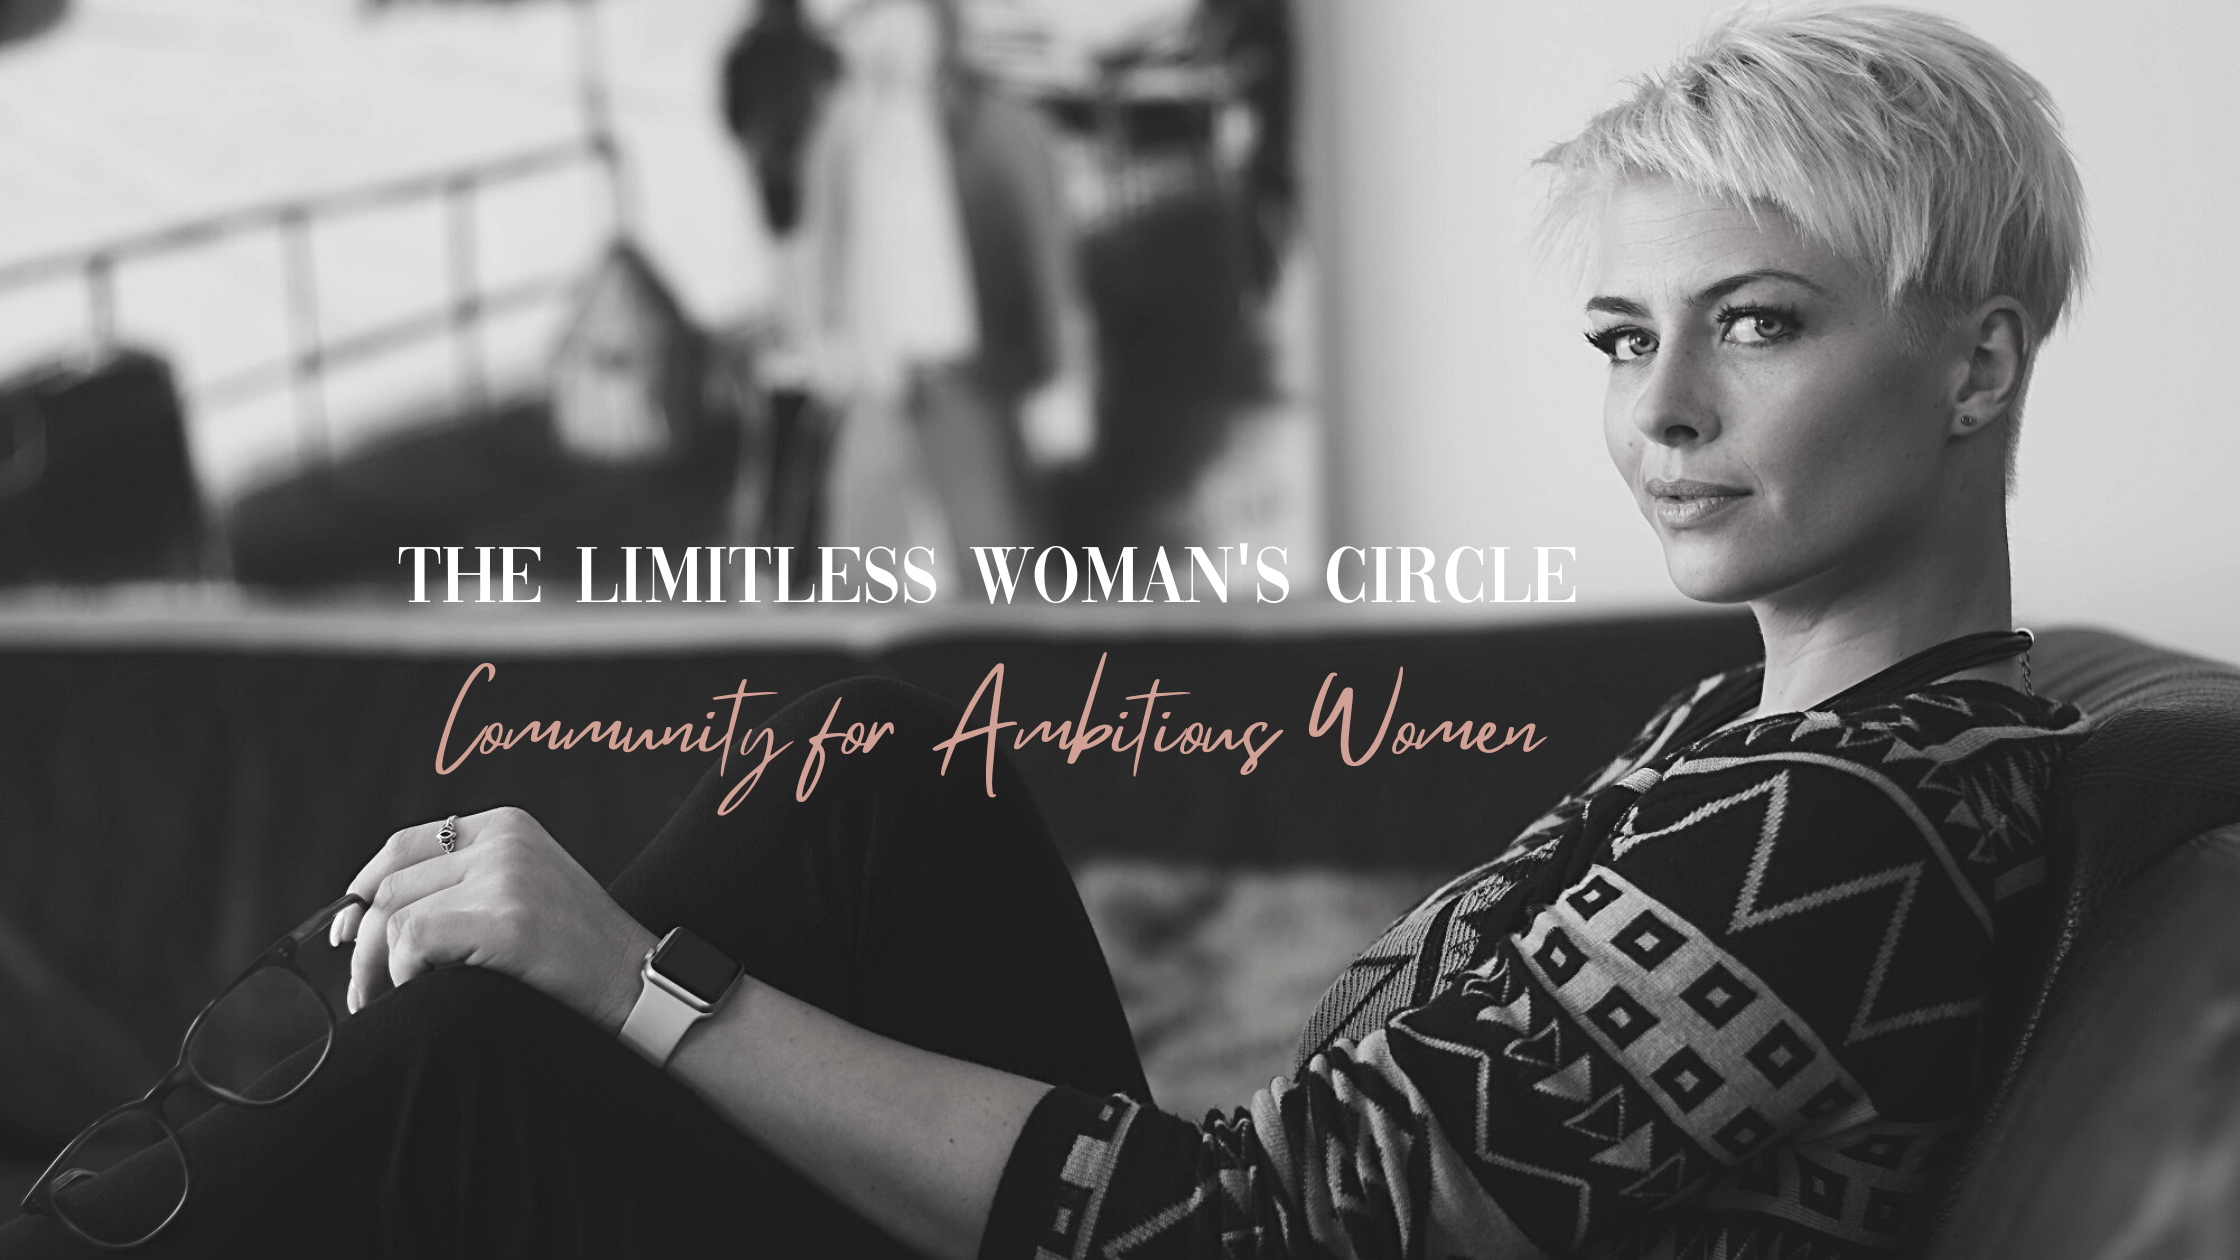 THE LIMITLESS WOMAN'S CIRCLE